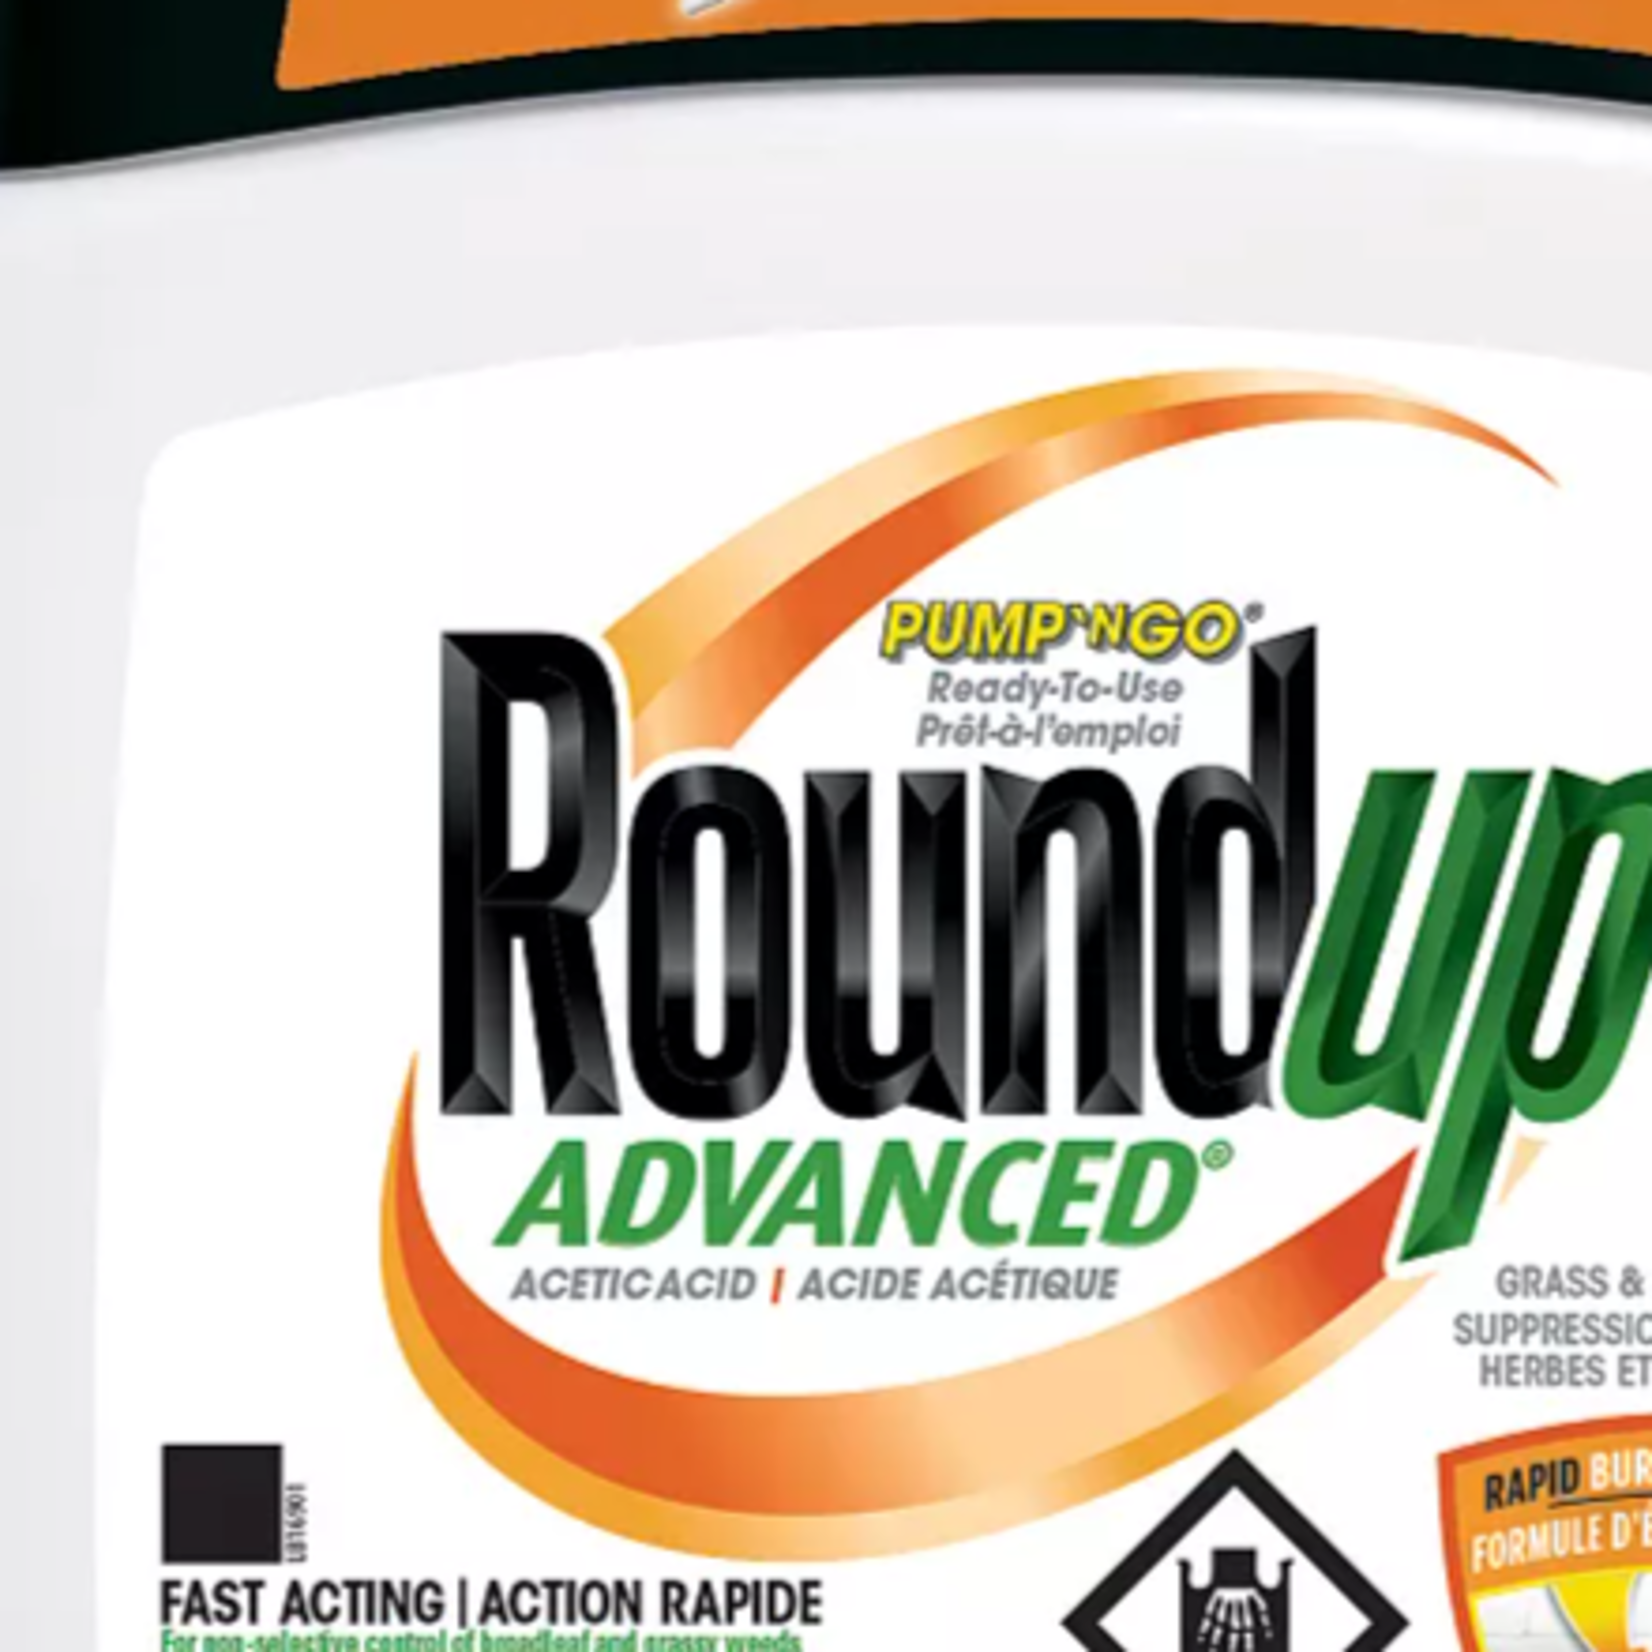 Roundup Advanced Ready-To-Use Grass and Weed Control with Pump N Go 5L